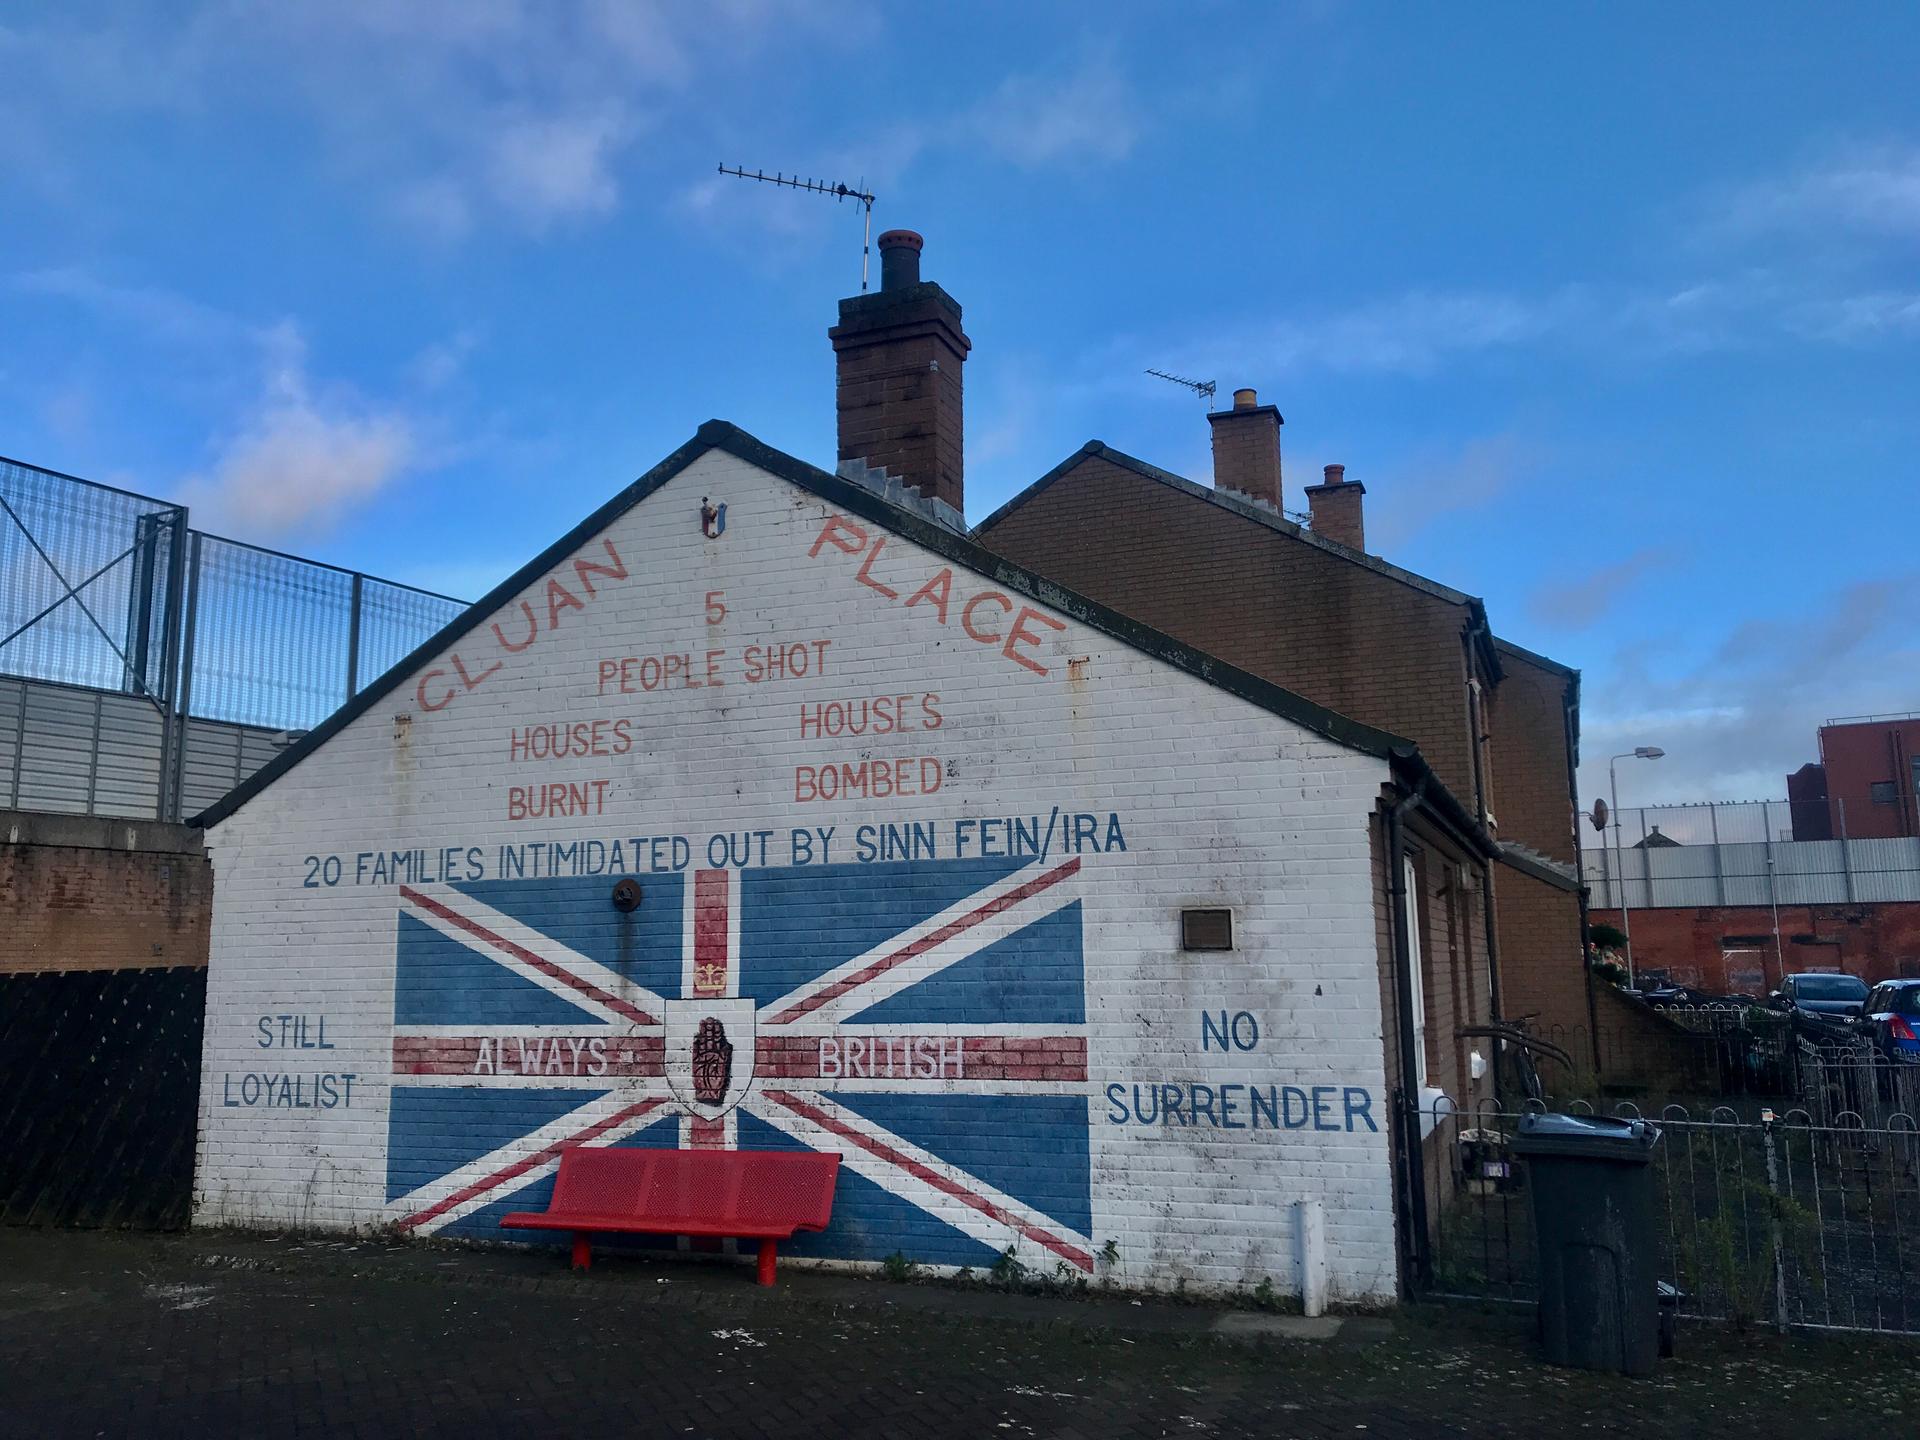 A side of a house is painting with British loyalist colors and message.